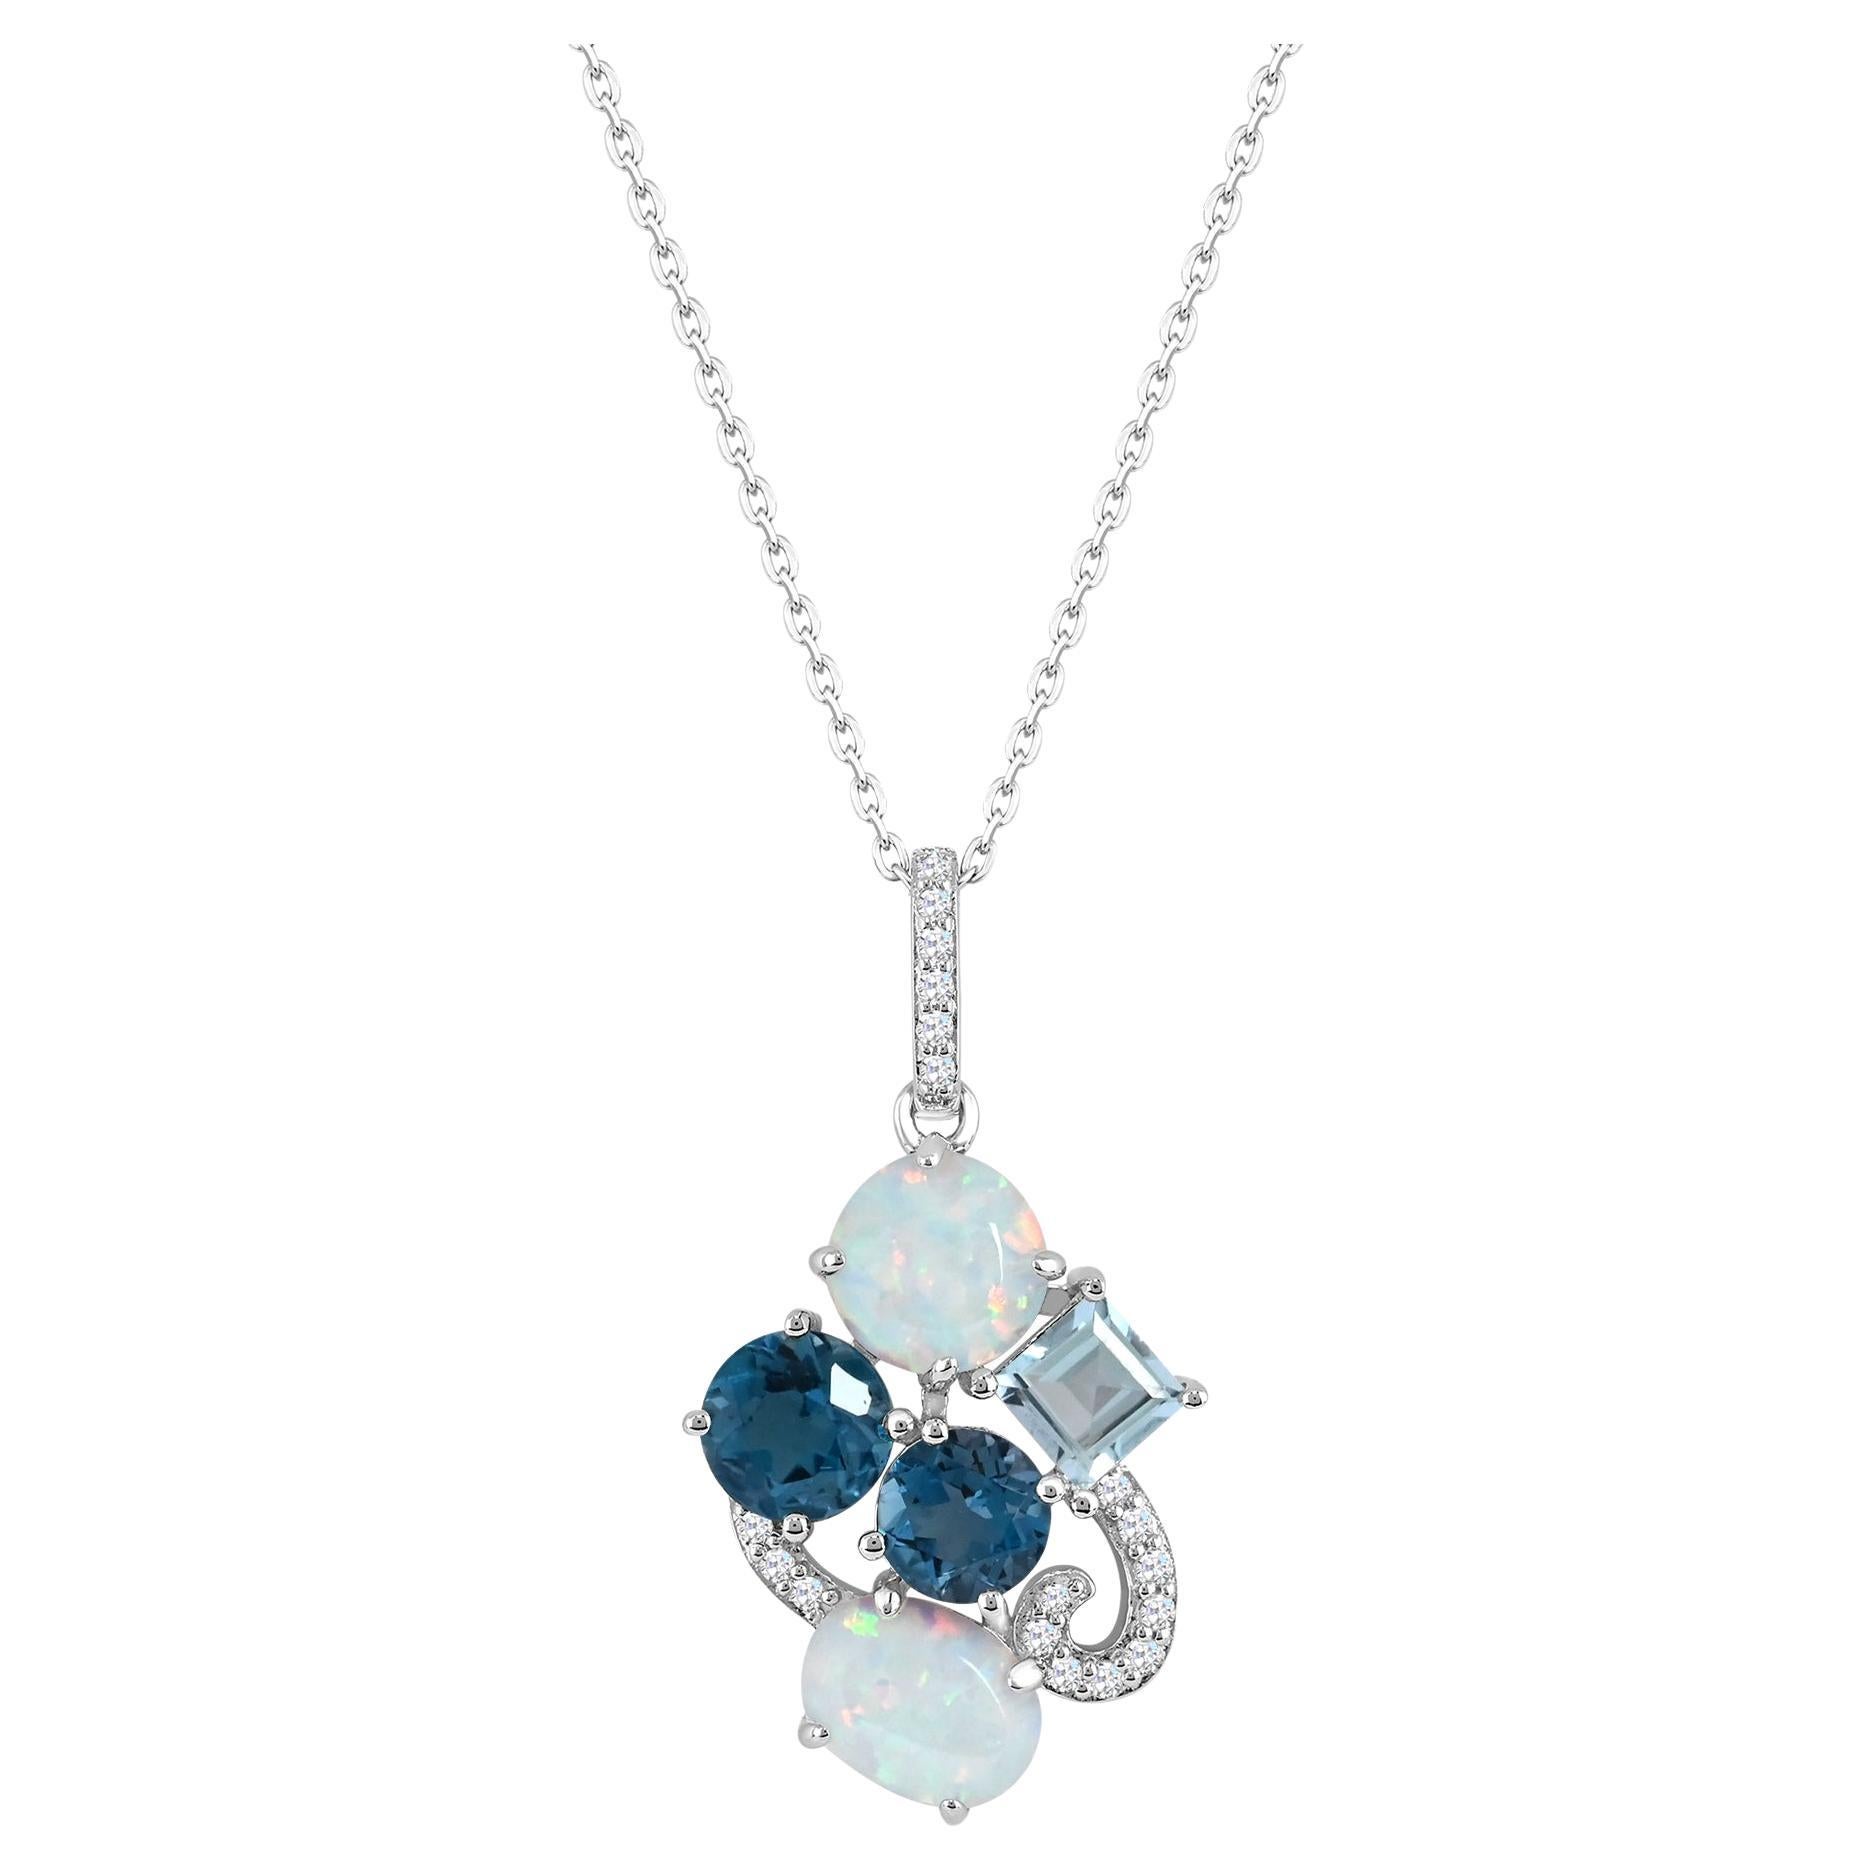 4-1/2 ct. Created Opal and Blue & White Topaz Sterling Silver Pendant Necklace